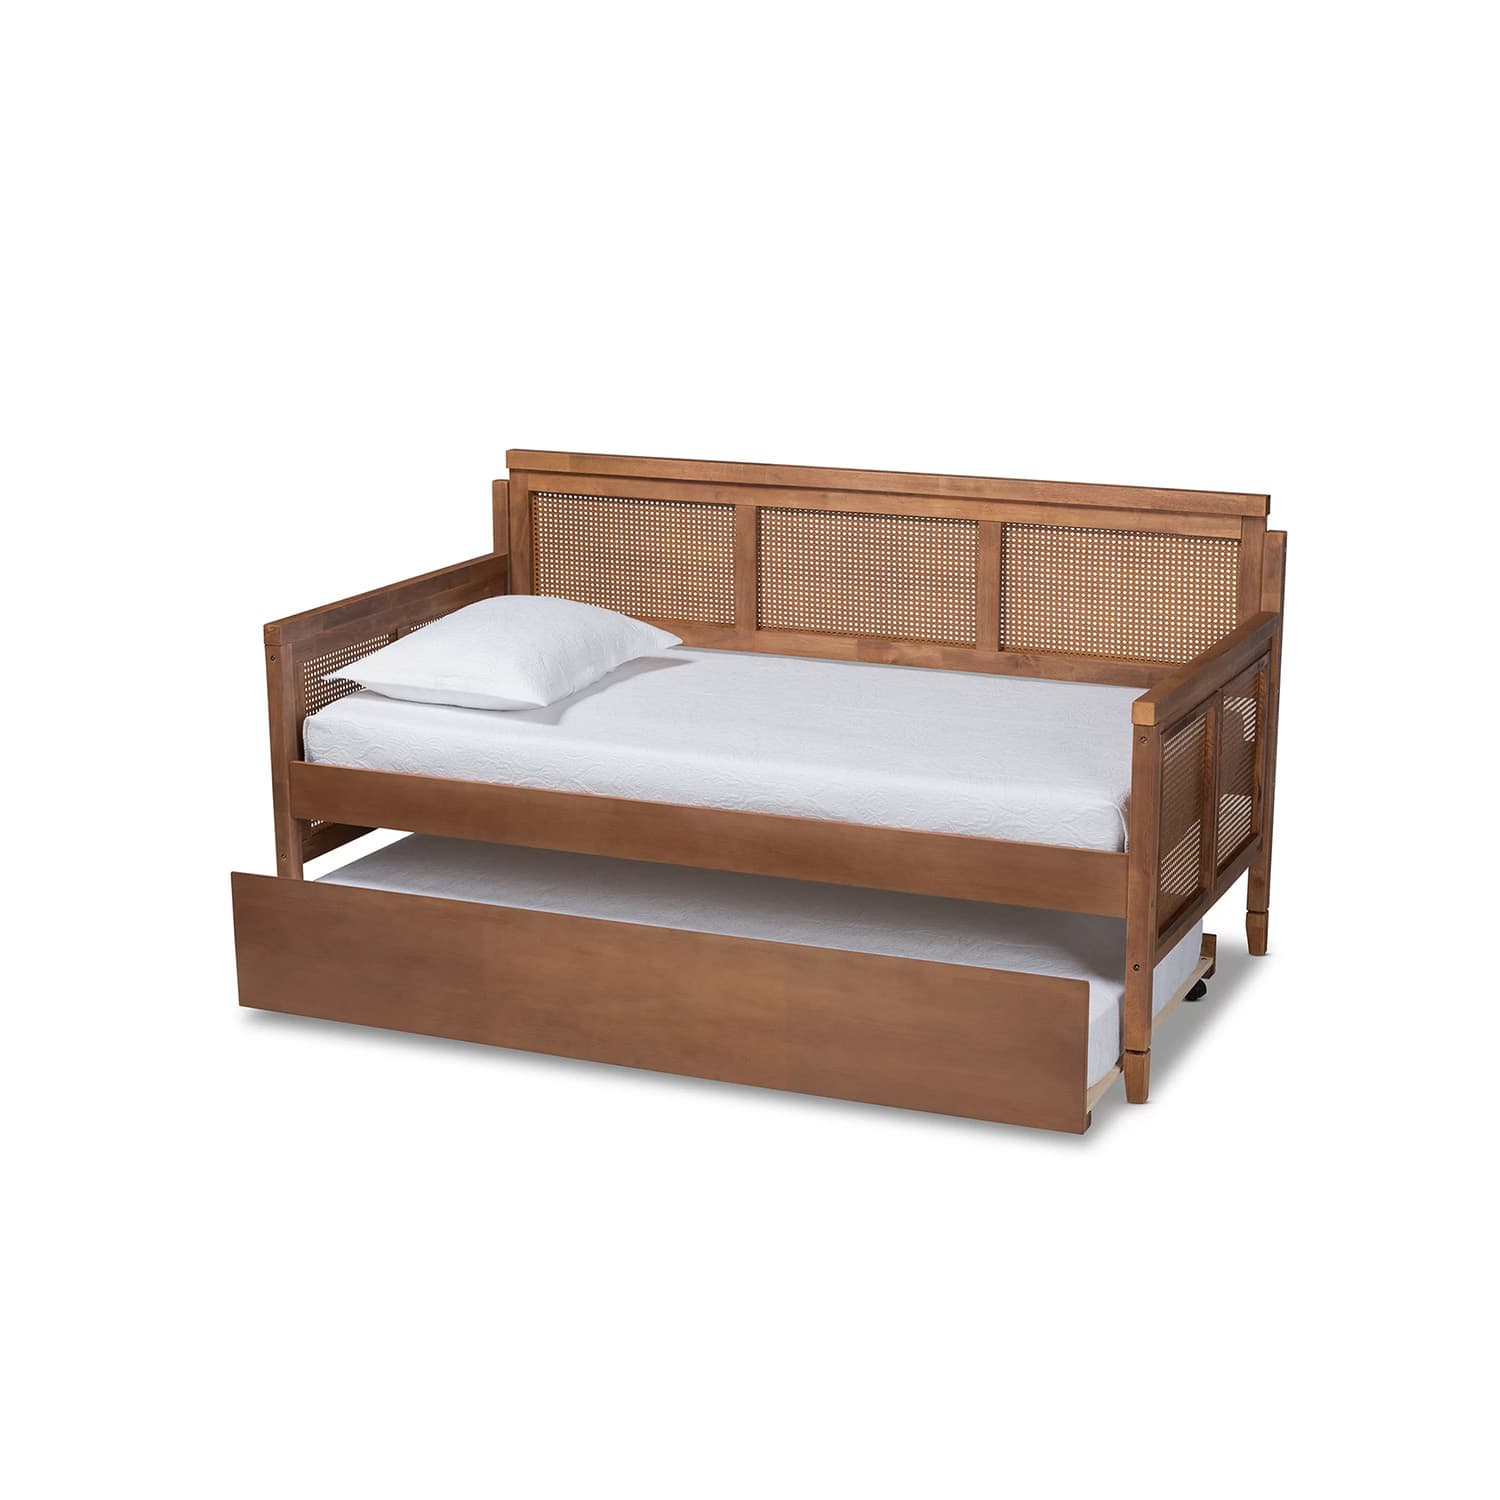 10 Trundle Beds That Are the Answer to Your Small Space Woes